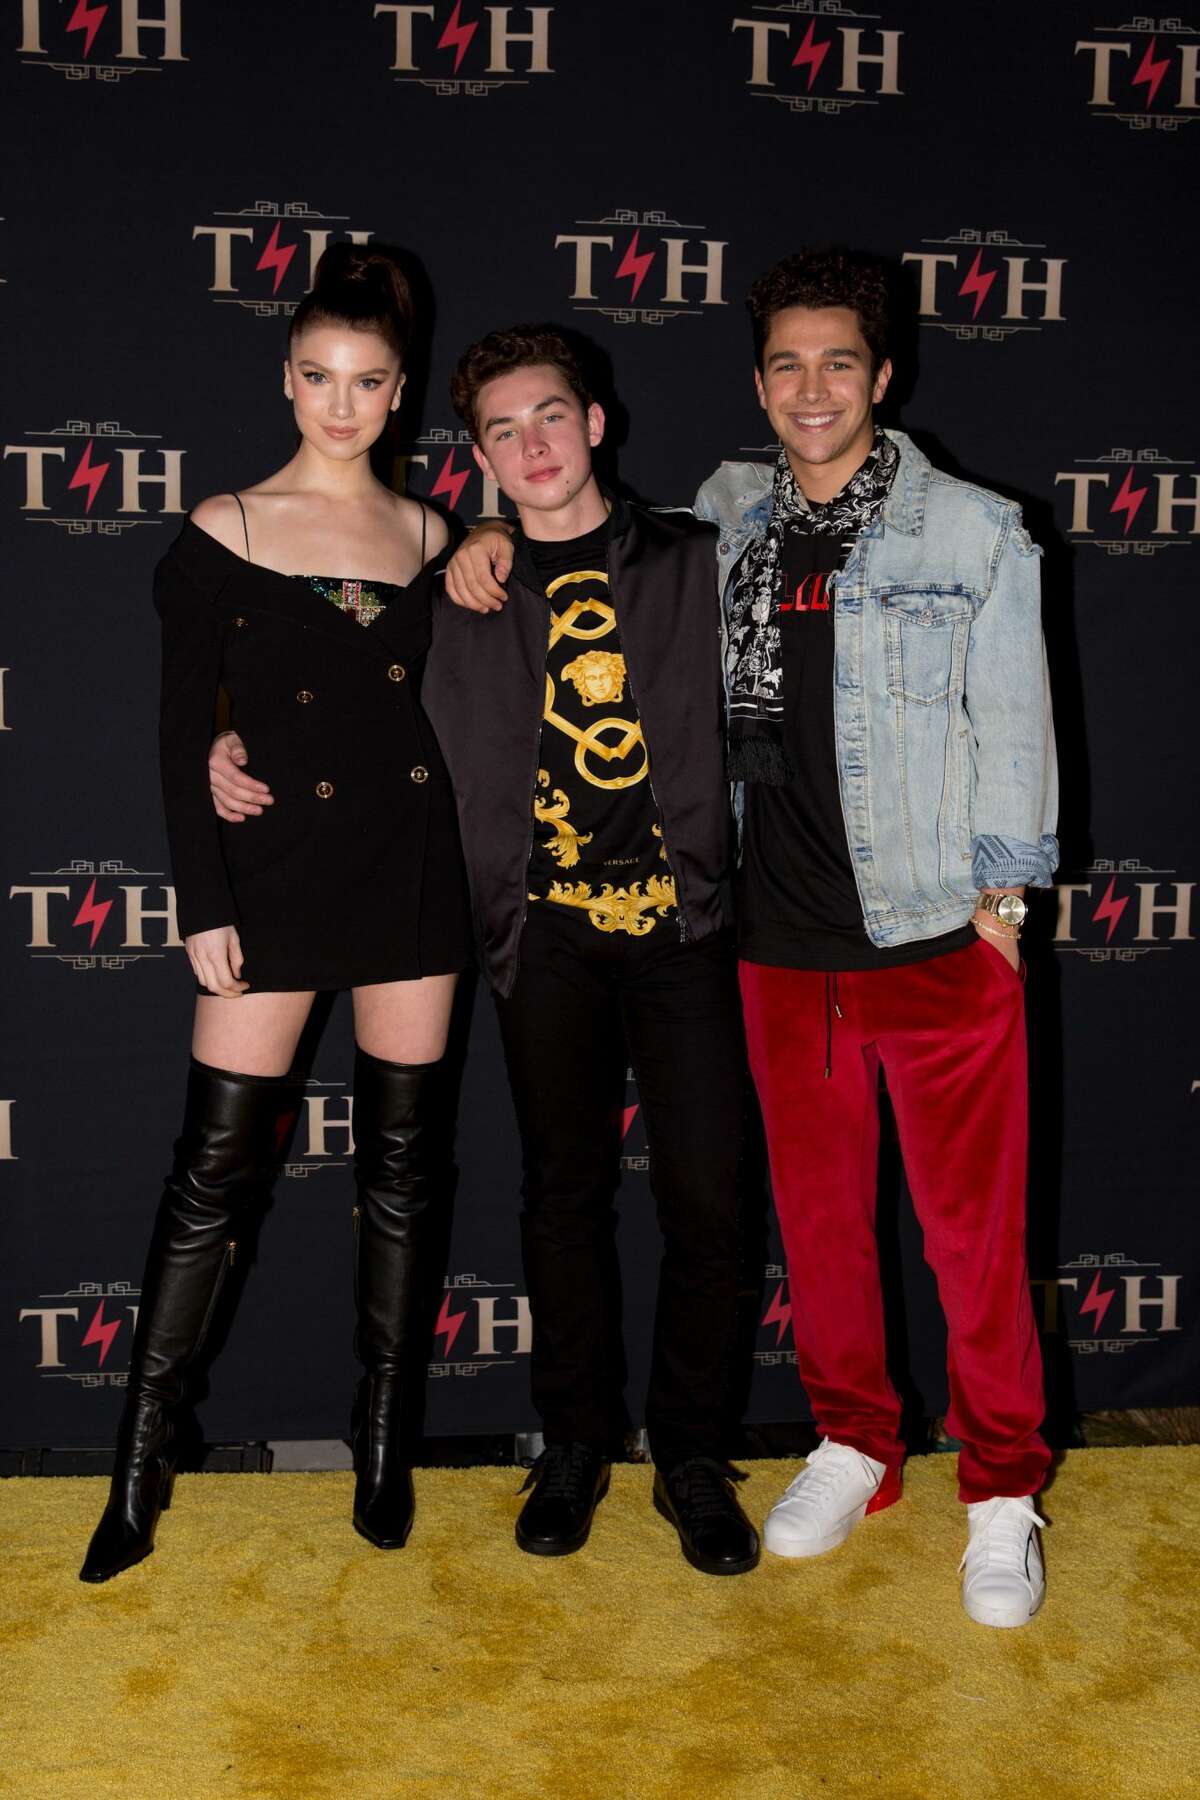 Pop sensation Austin Mahone was all smiles as he snapped photos with Thomas and Maya Henry at Thomas' star-studded 4 million dollar birthday celebration at Hotel Discotheque over the weekend in San Antonio, TX. There were performances by Migos and J Balvin, a special DJ set by Diplo and DJ Ruckus, aerial performers, burlesque dancers, contortionists and more!